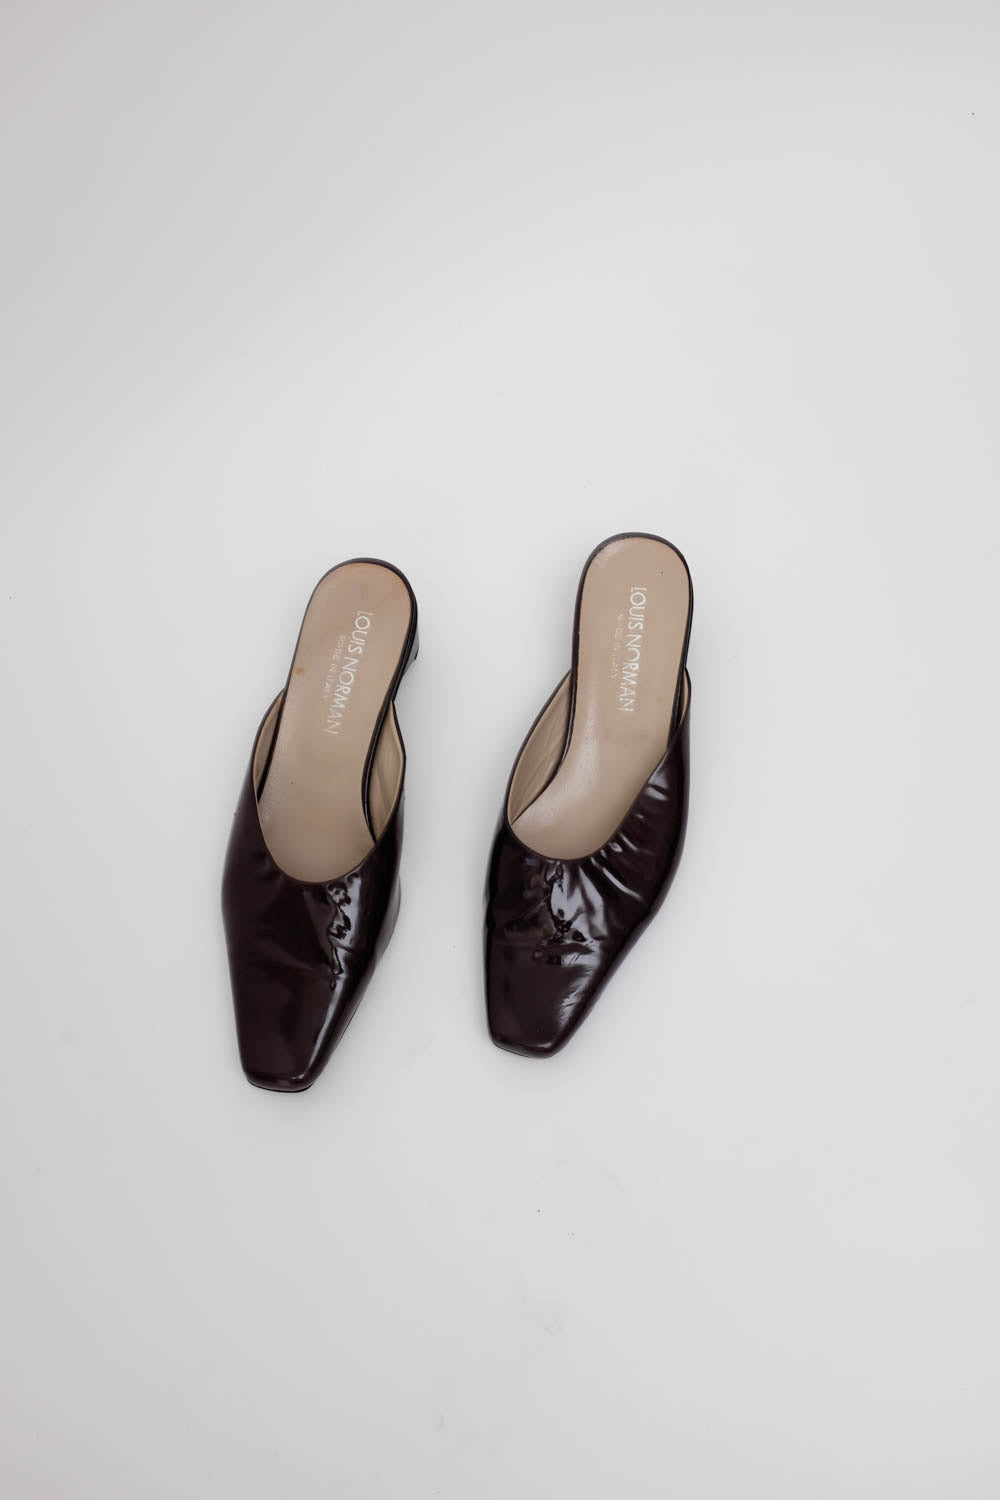 0032_PATENT LEATHER MULES 37